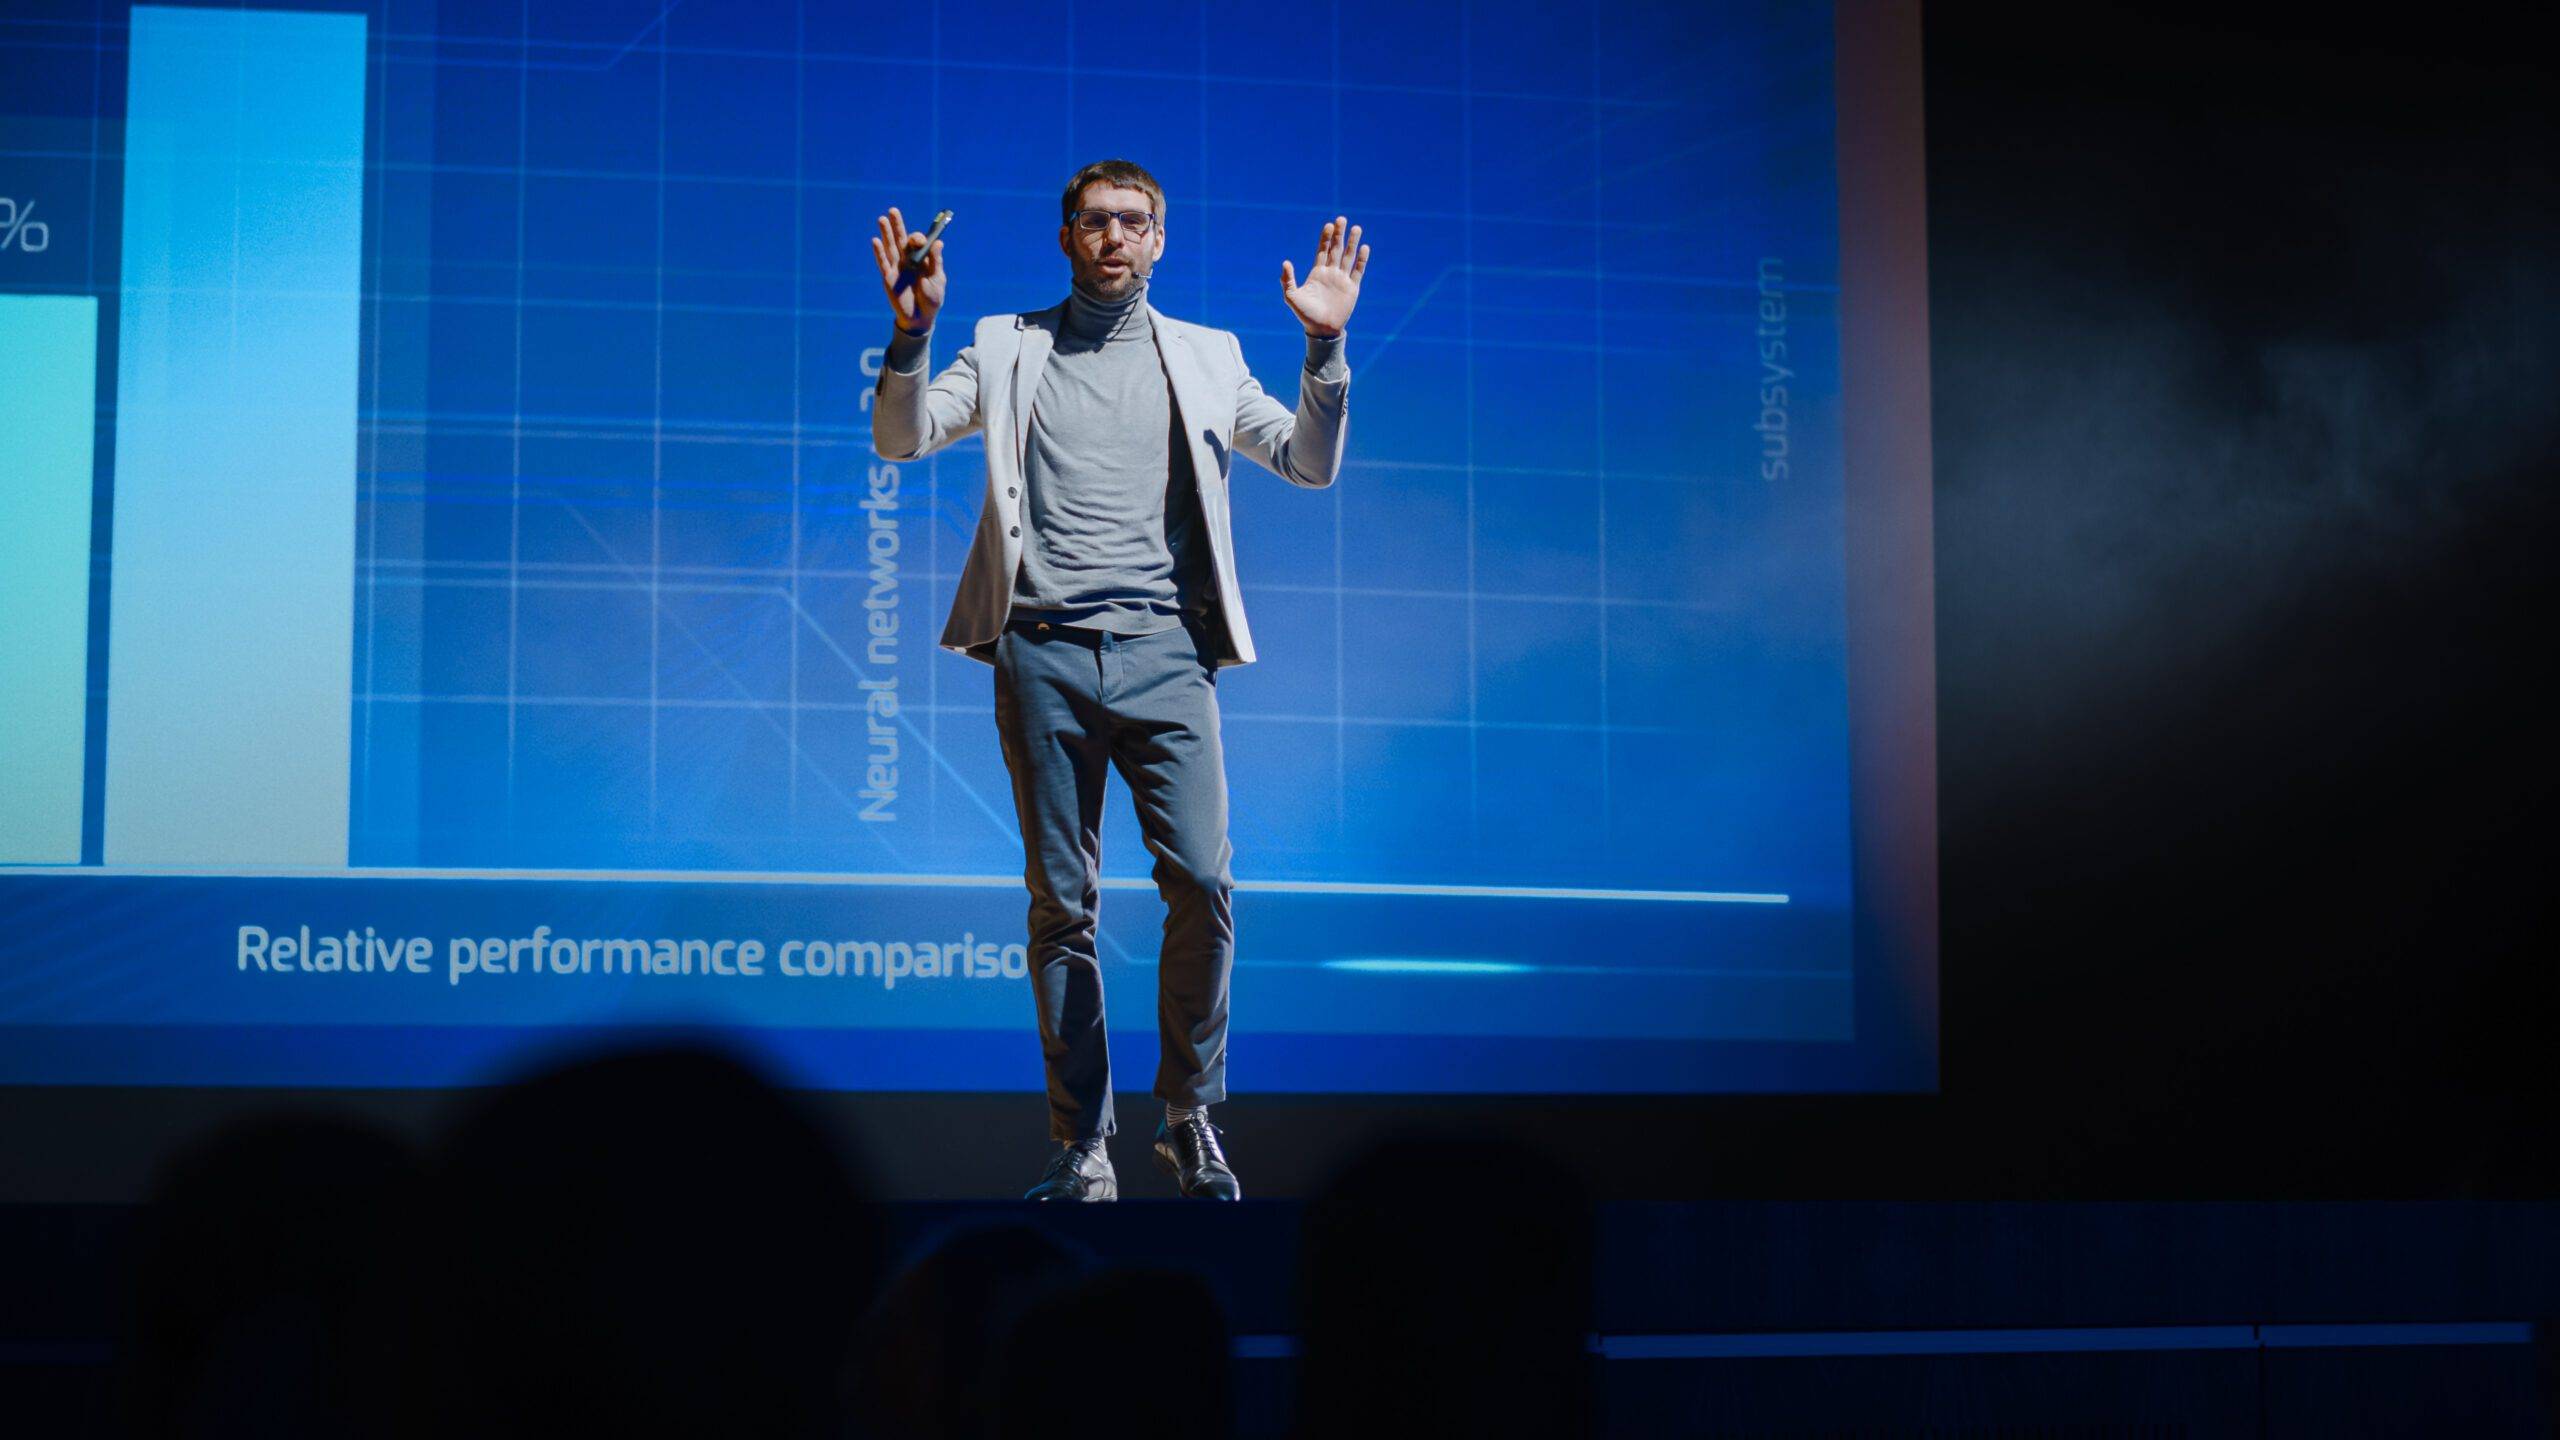 Man stands on a stage with a battery-powered laser pointer in his hand in front of a blue background.